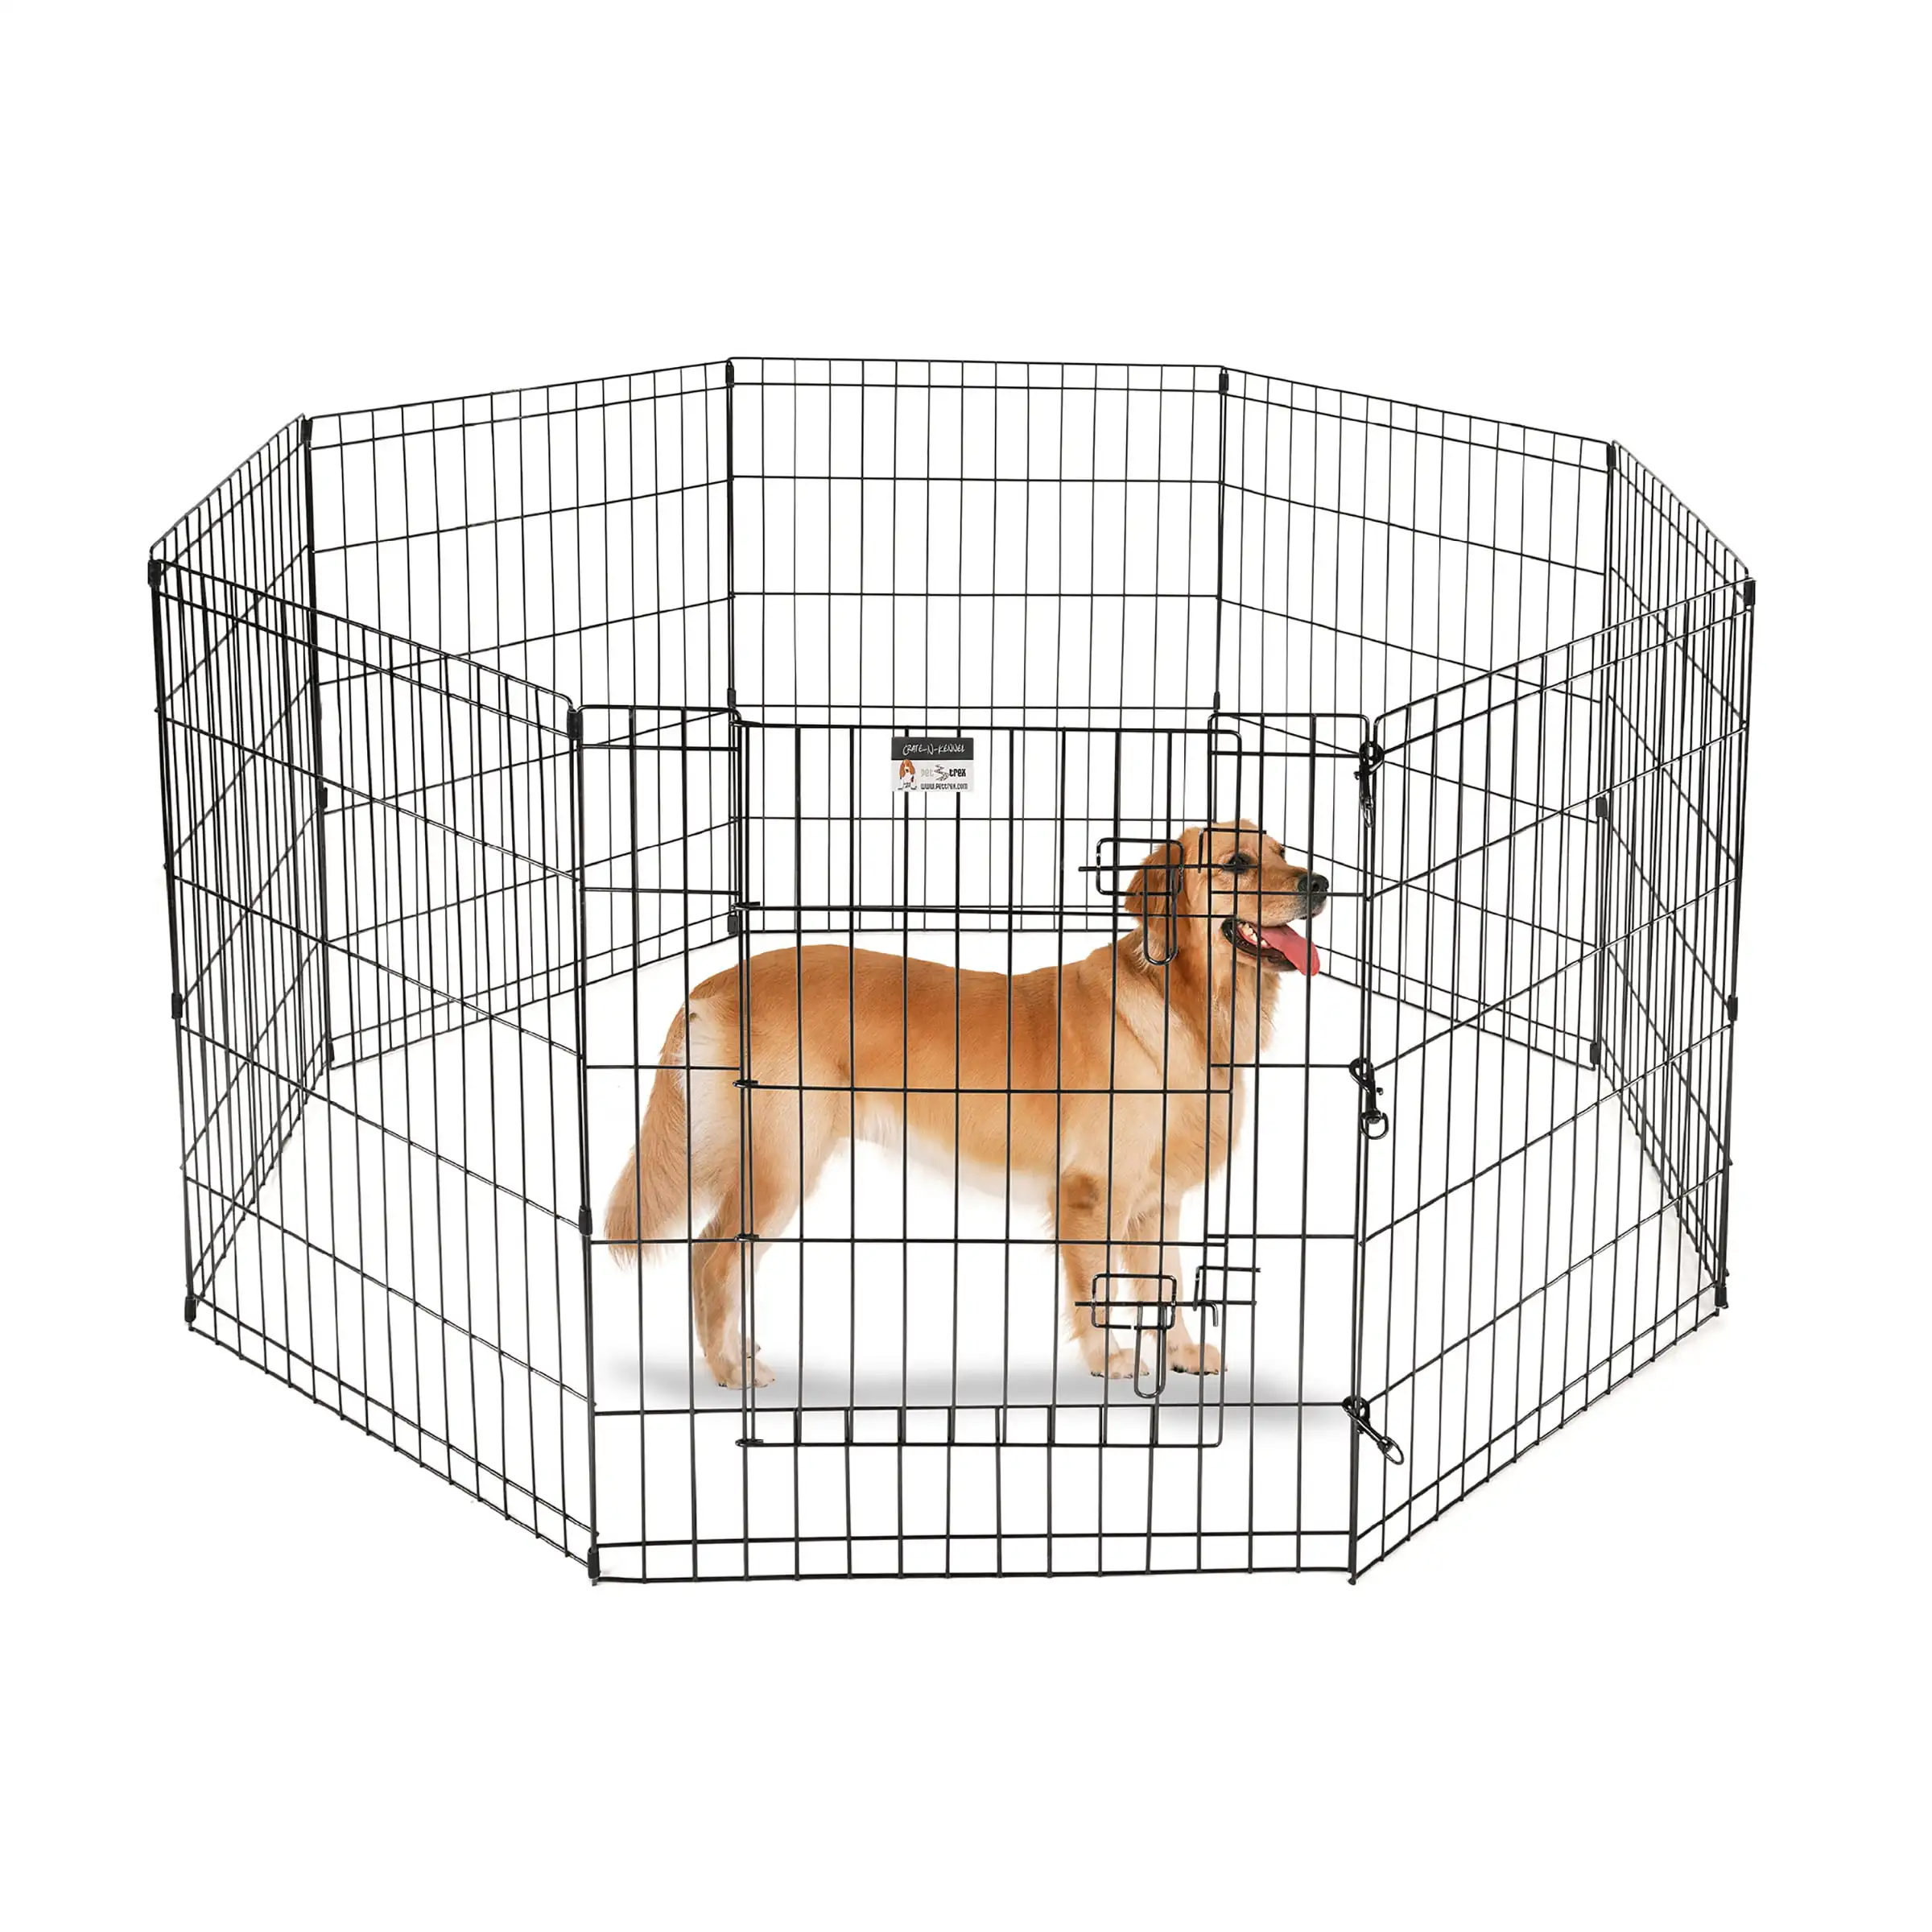 

Puppy Playpen Foldable Metal Exercise Enclosure Eight 24x30-Inch Panels Indoor/Outdoor Pen with Gate for Dogs, Cats